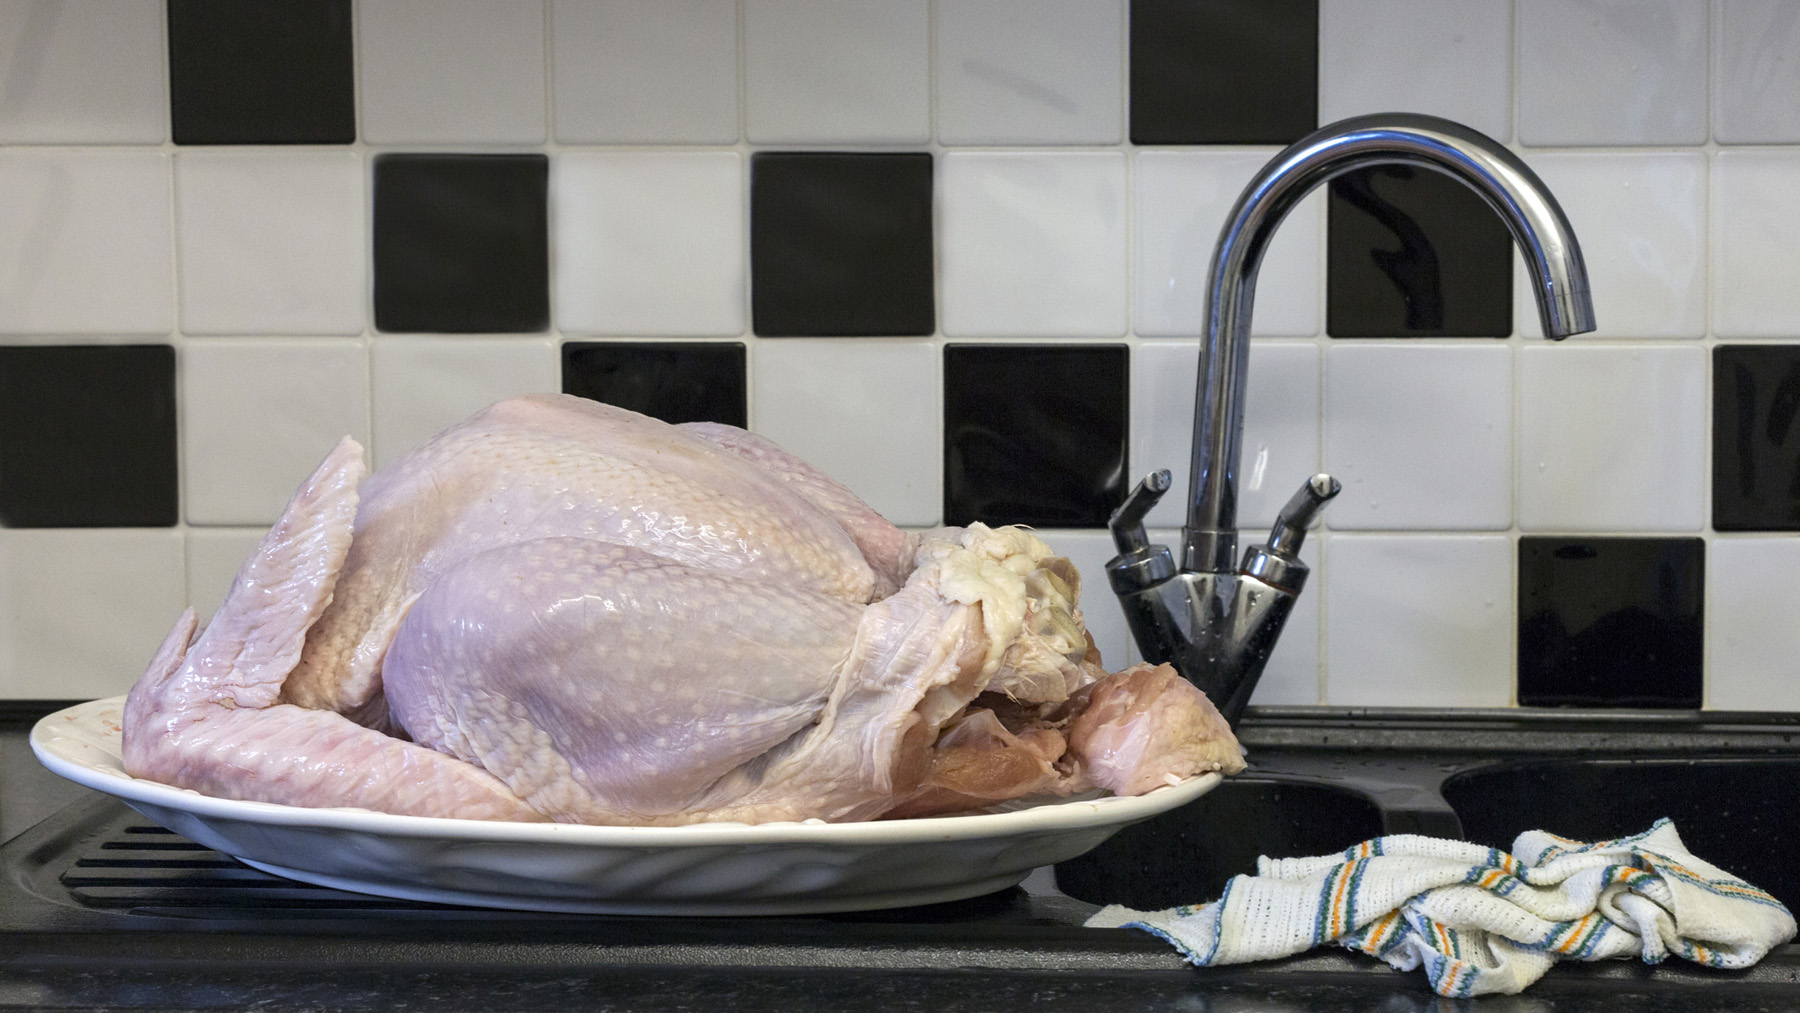 Raw whole turkey defrosting on a kitchen sink. A dish cloth is in close proximity to the defrosting meat, creating a cross contamination and food safety issue.